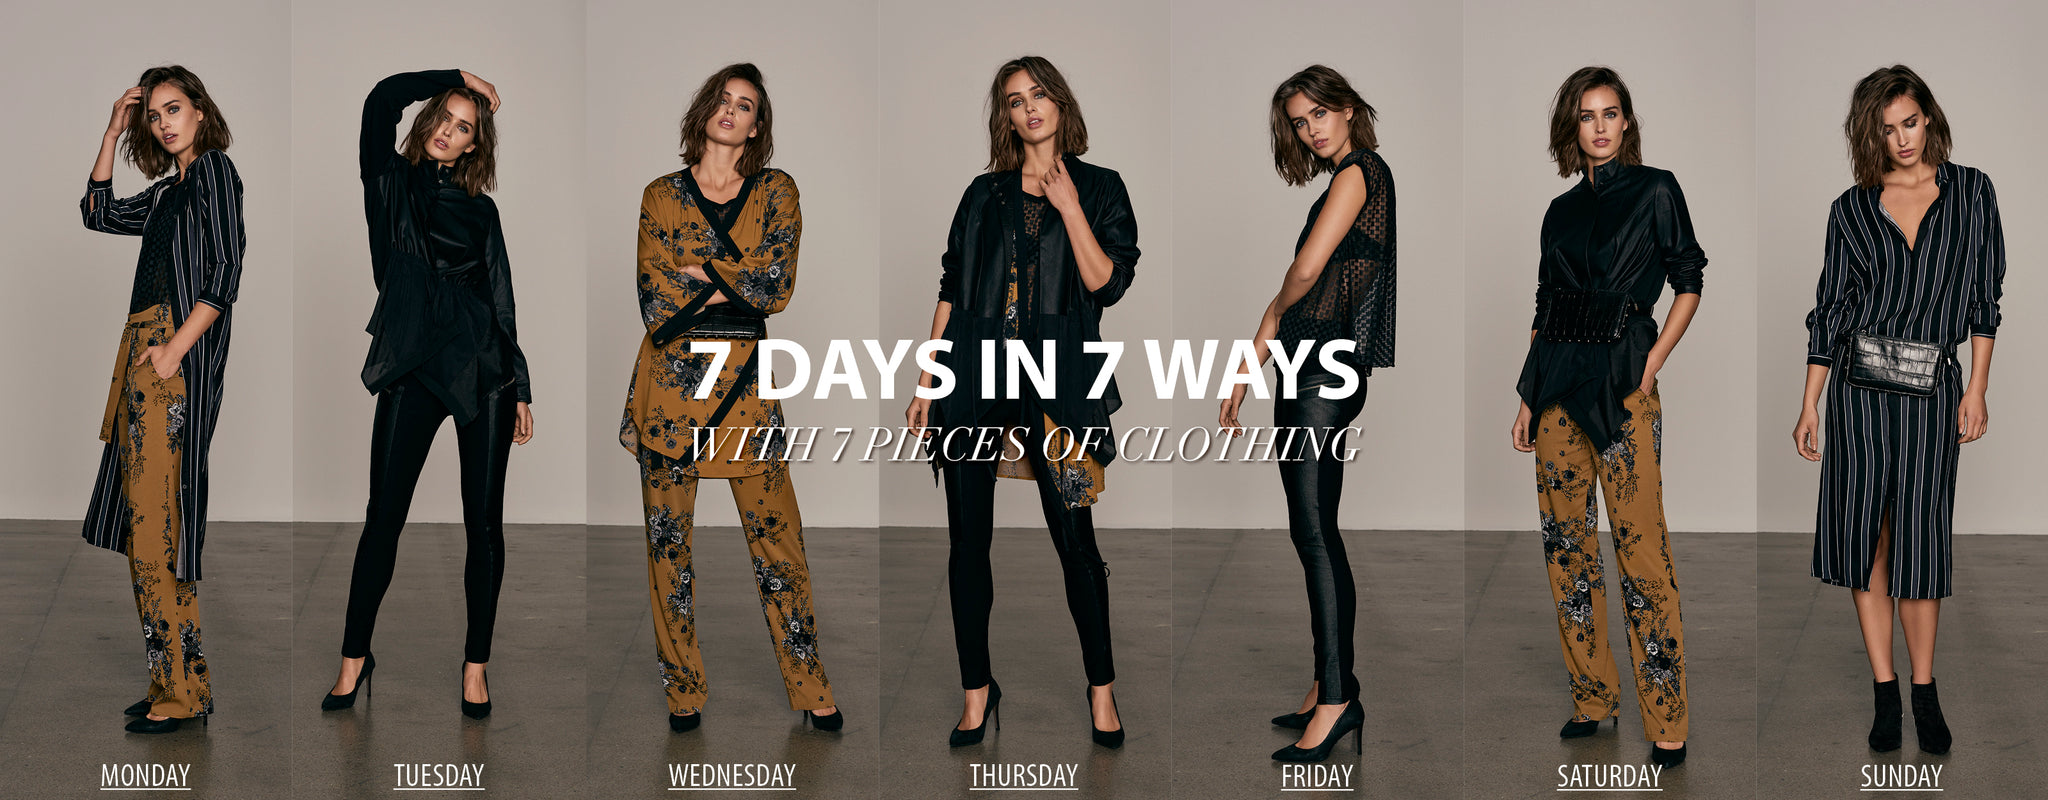 7 Days in 7 Ways Stylingguide